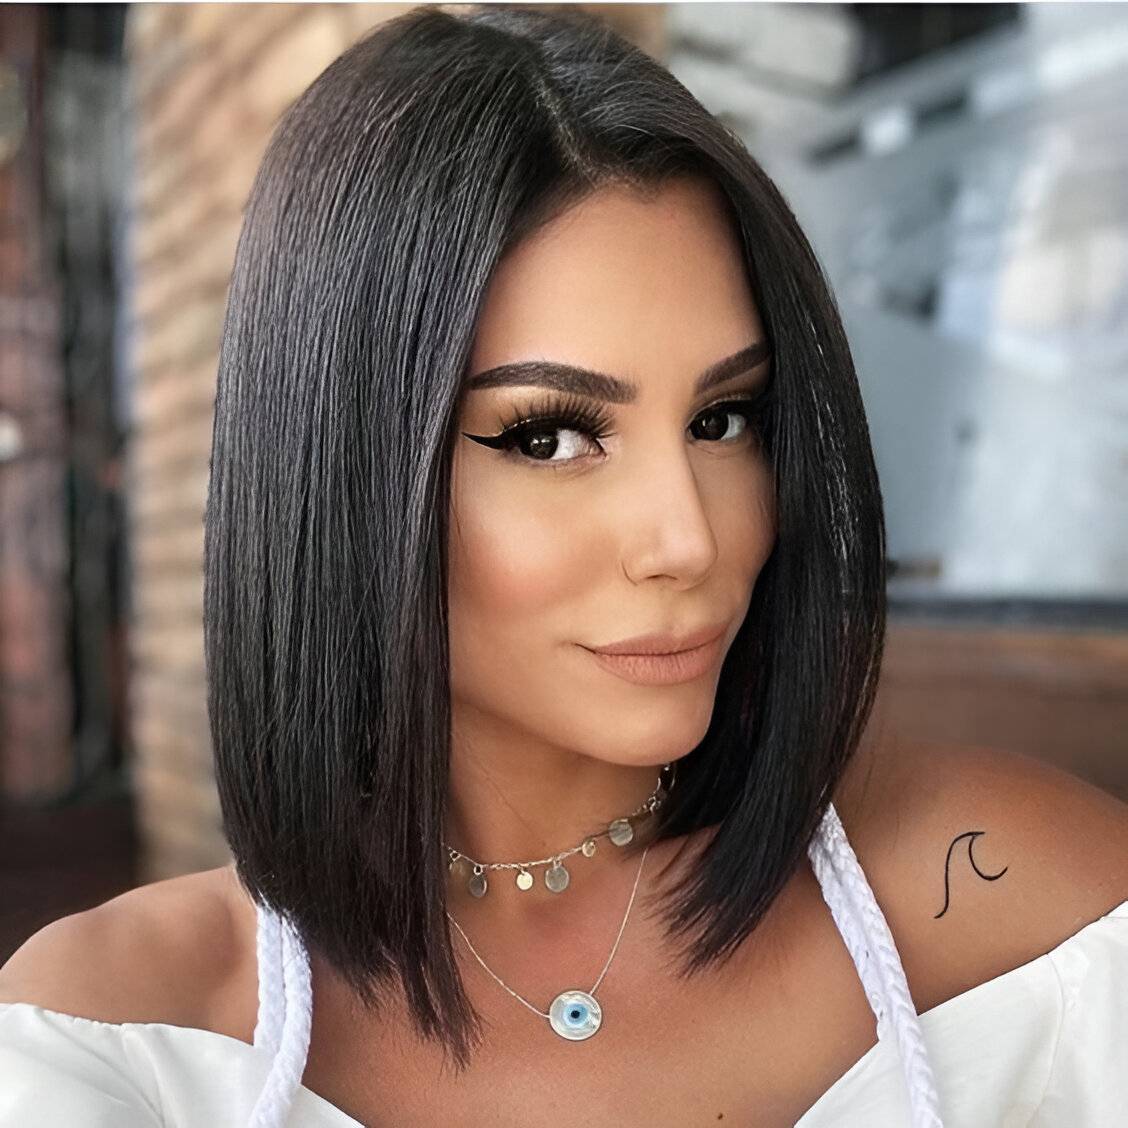 Shine Bright Like A Diamond With These 25 Gorgeous Straight Bob Haircuts - 167